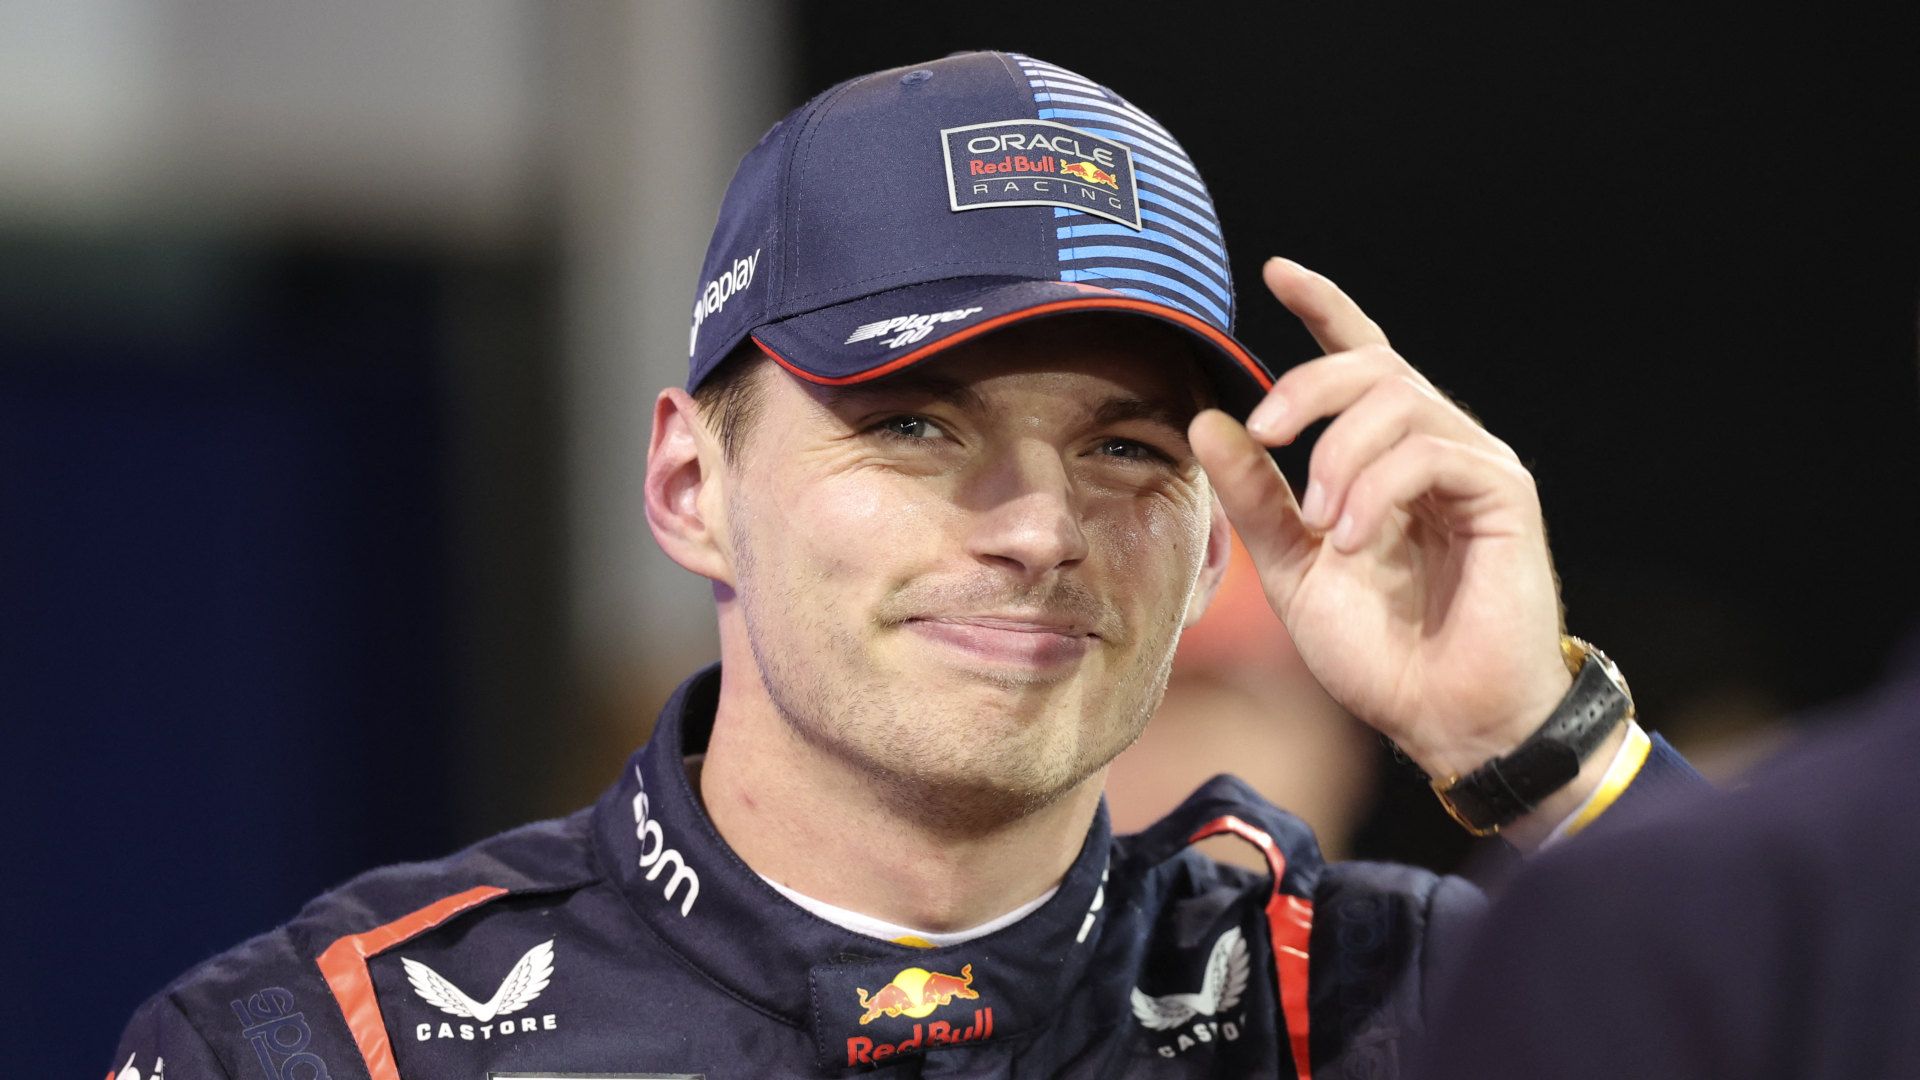 max verstappen expects a physically demanding race in miami